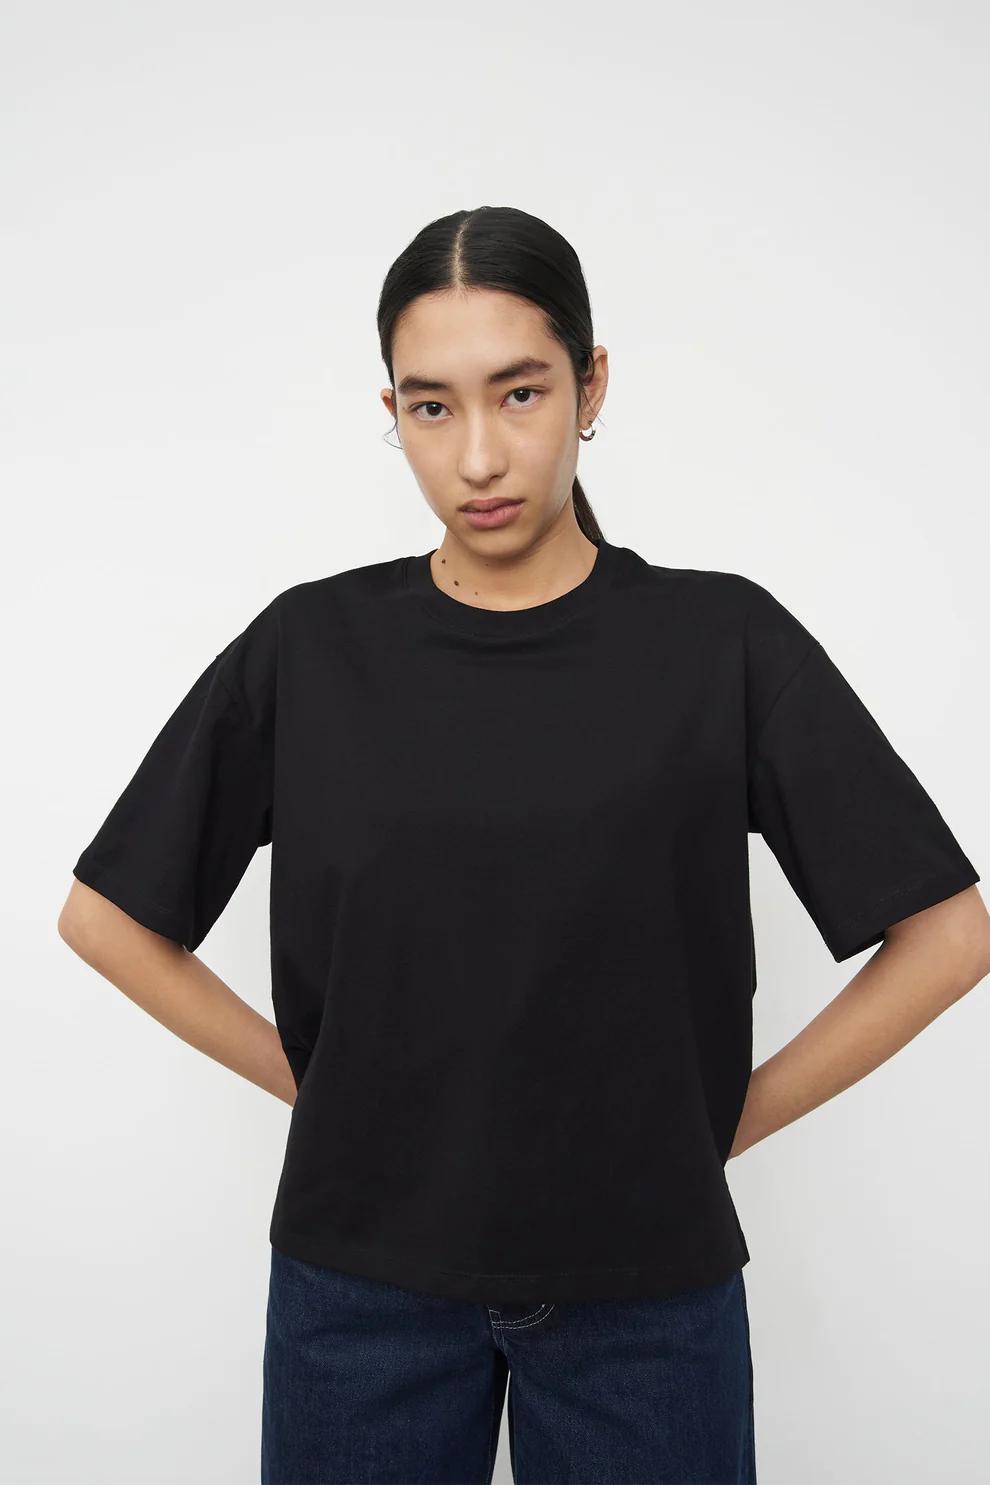 Product Image for Everyday Tee, Black